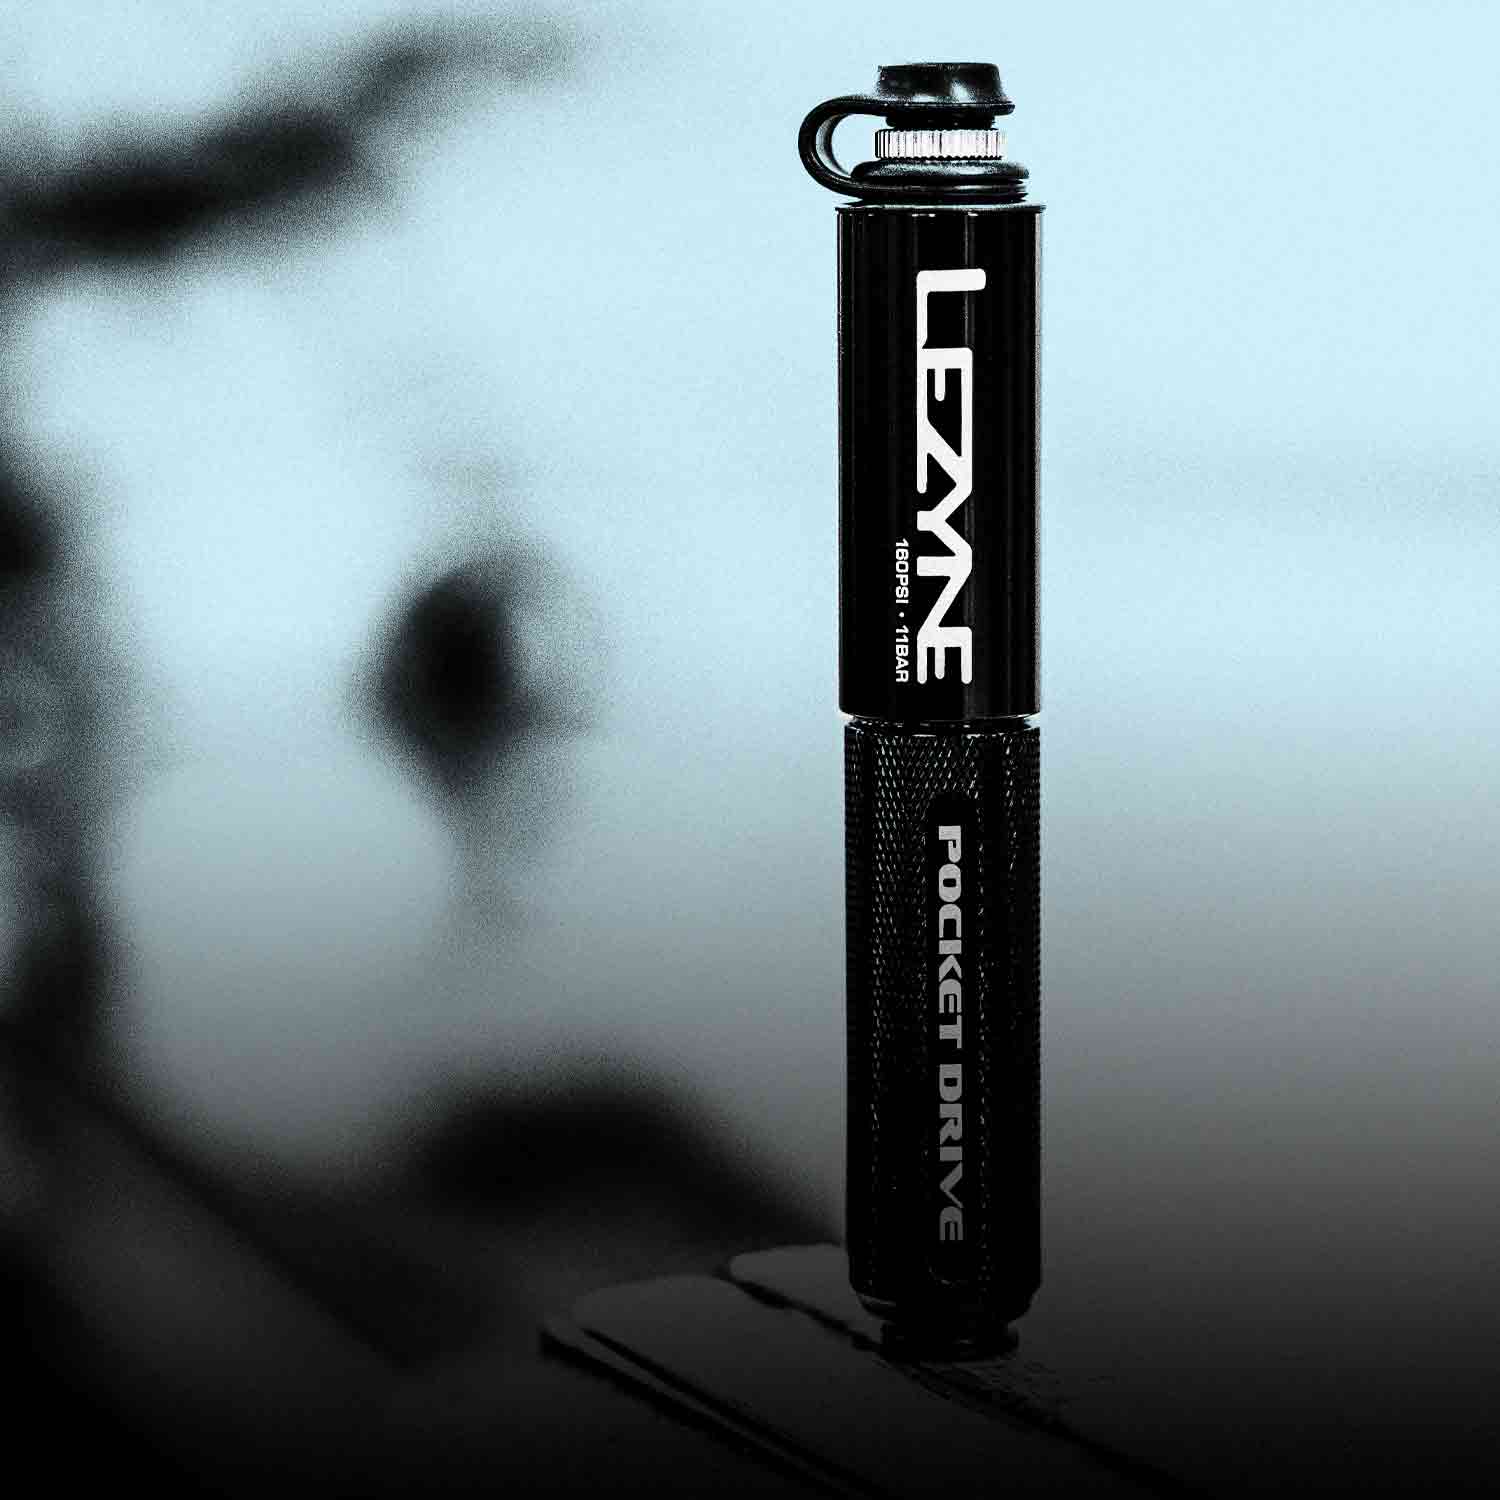 A small bicycle pump with the words Lezyne Pocket Drive printed on it.